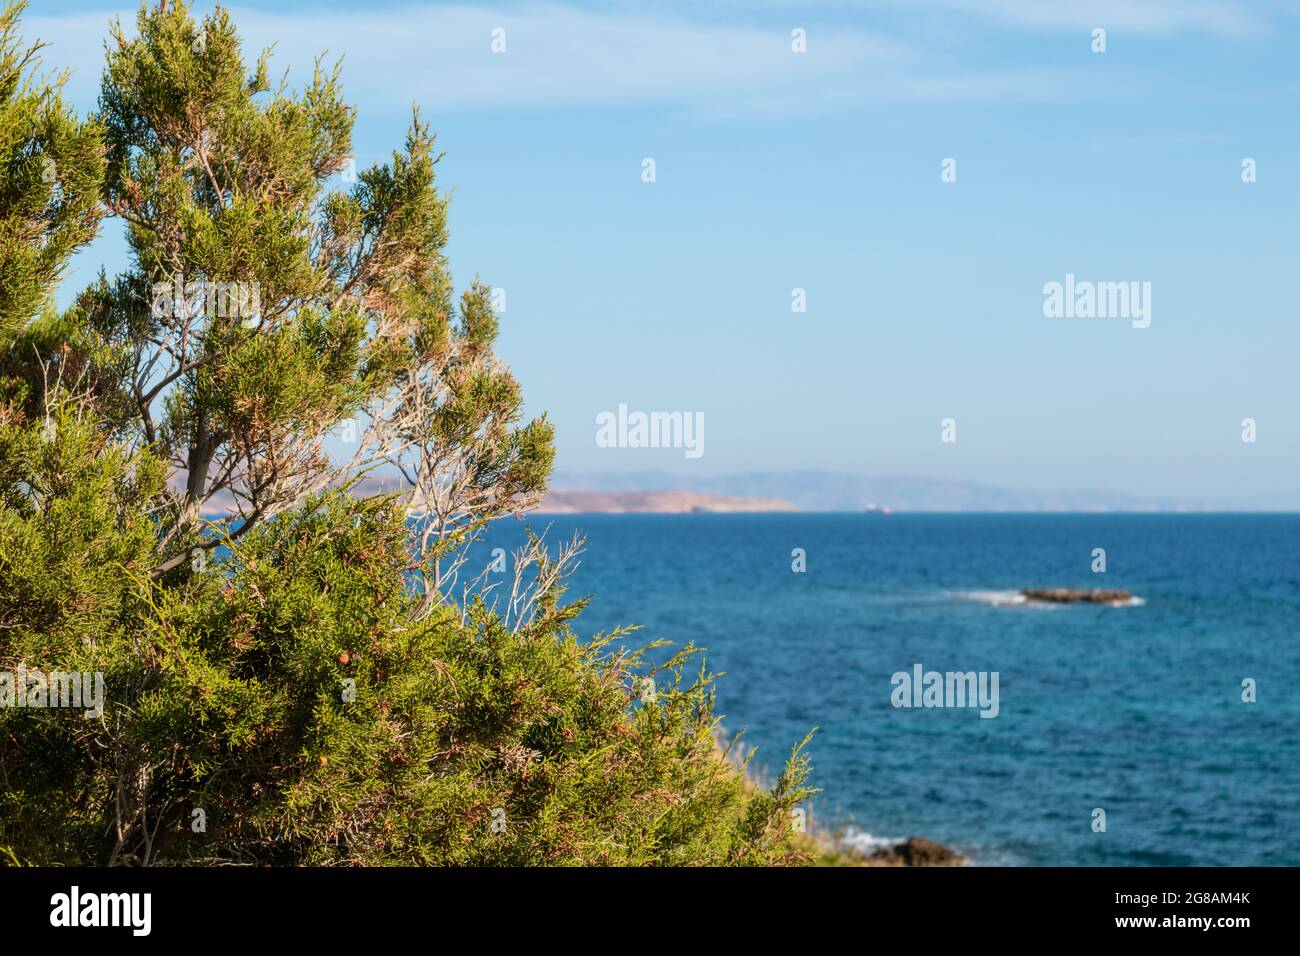 Juniperus excelsa green bush on blue wild sea shore landscape in Greece. Colorful summer view with blue clear Mediterranean sea Stock Photo